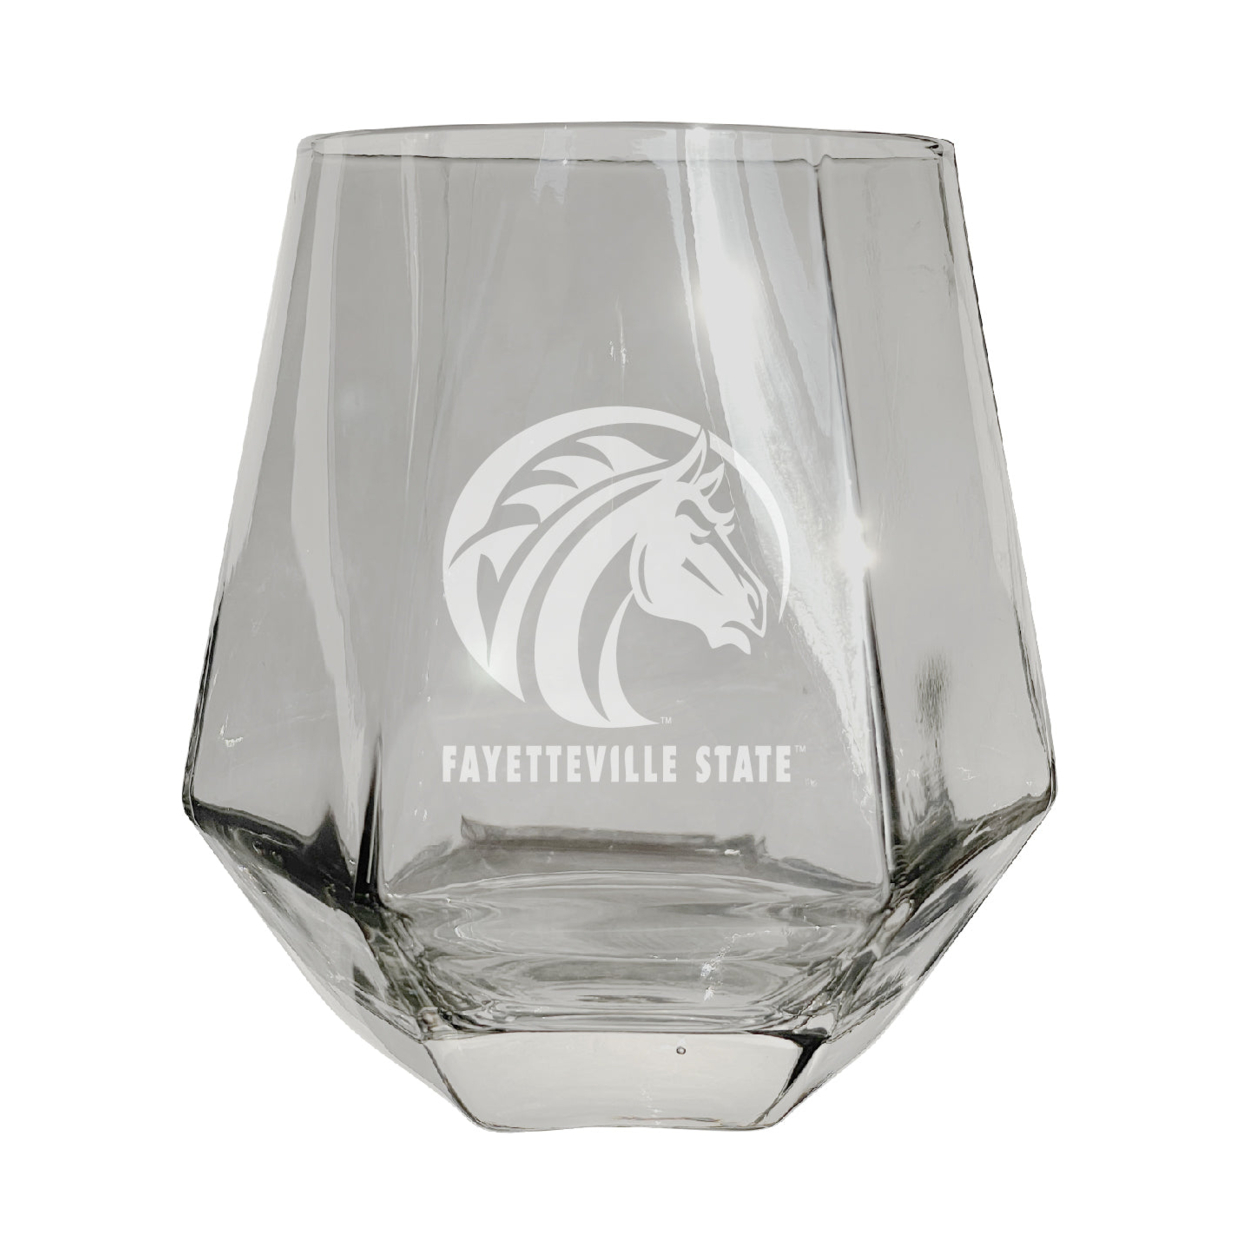 Fayetteville State University Etched Diamond Cut Stemless 10 Ounce Wine Glass Clear